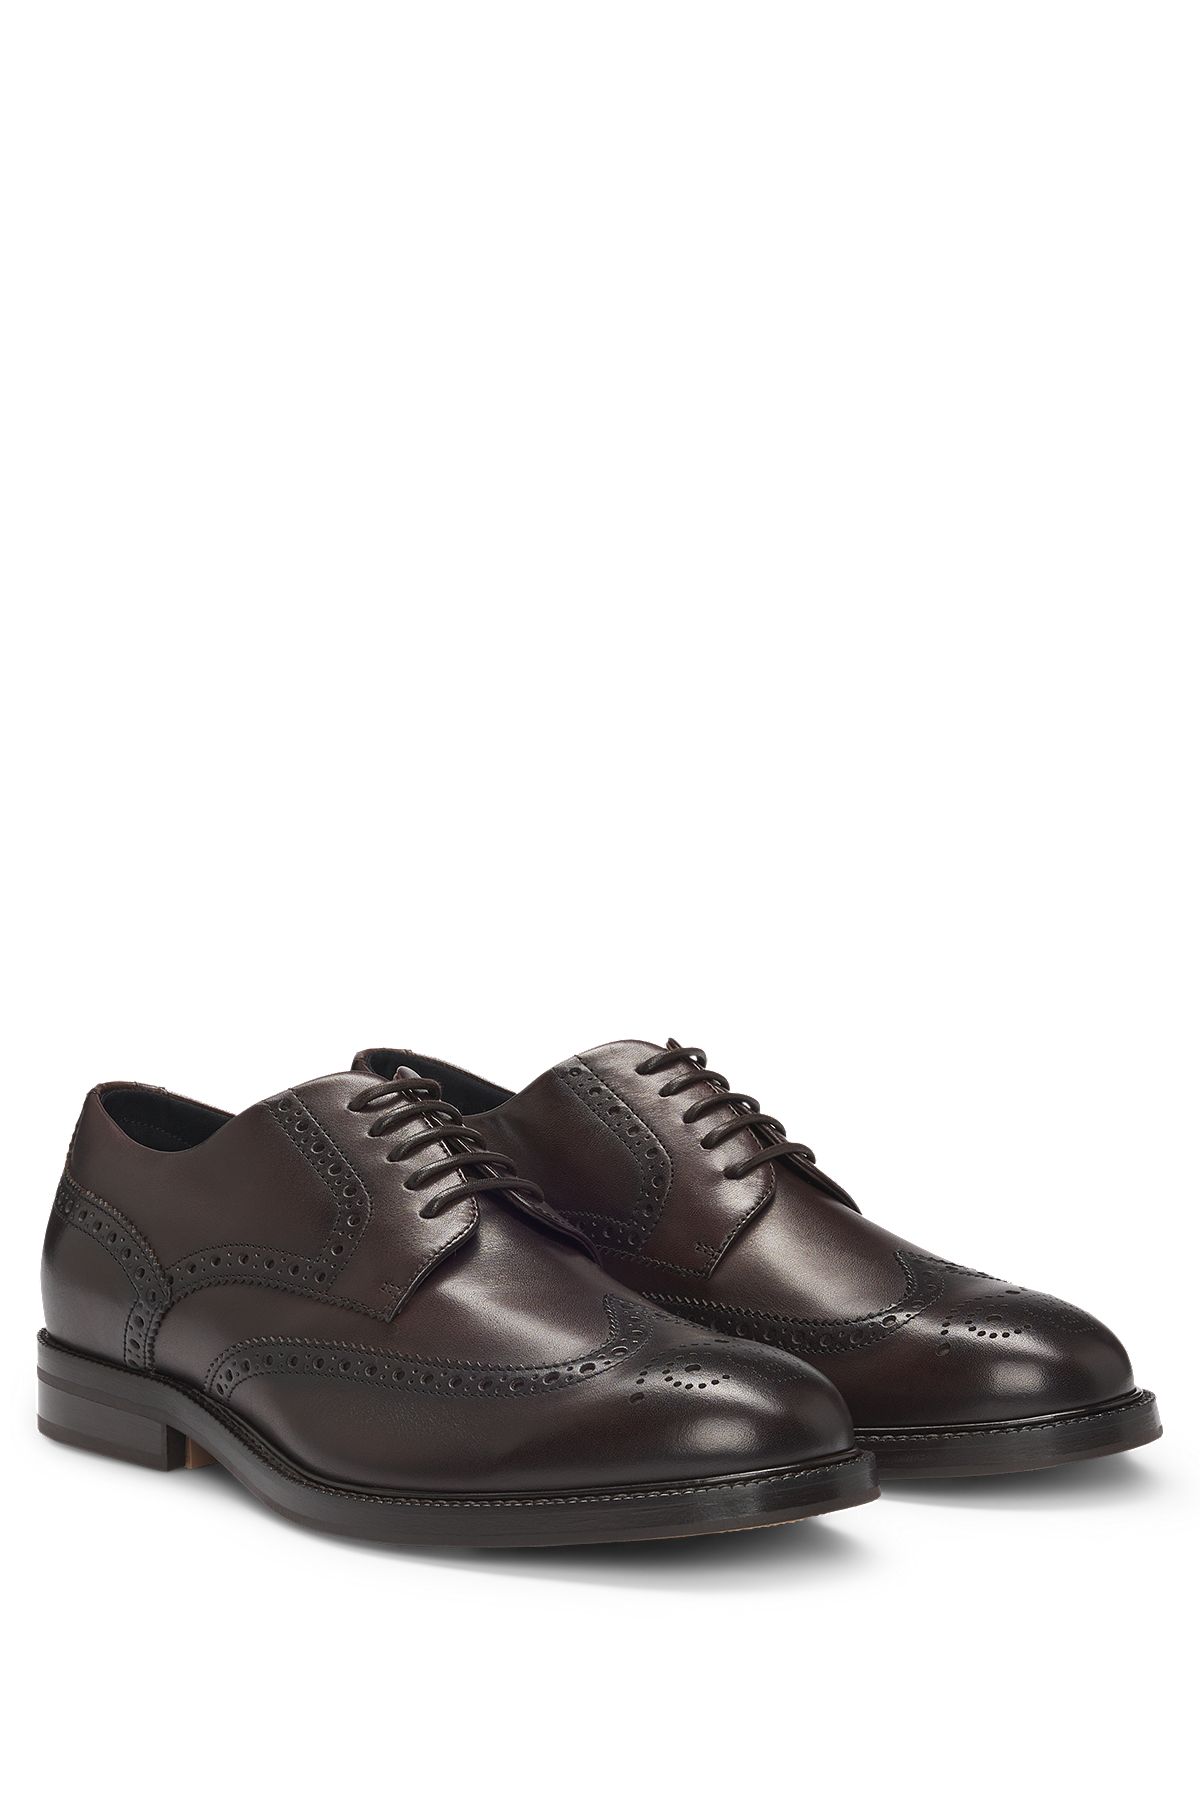 Dressletic Italian-made Derby shoes in leather, Dark Brown